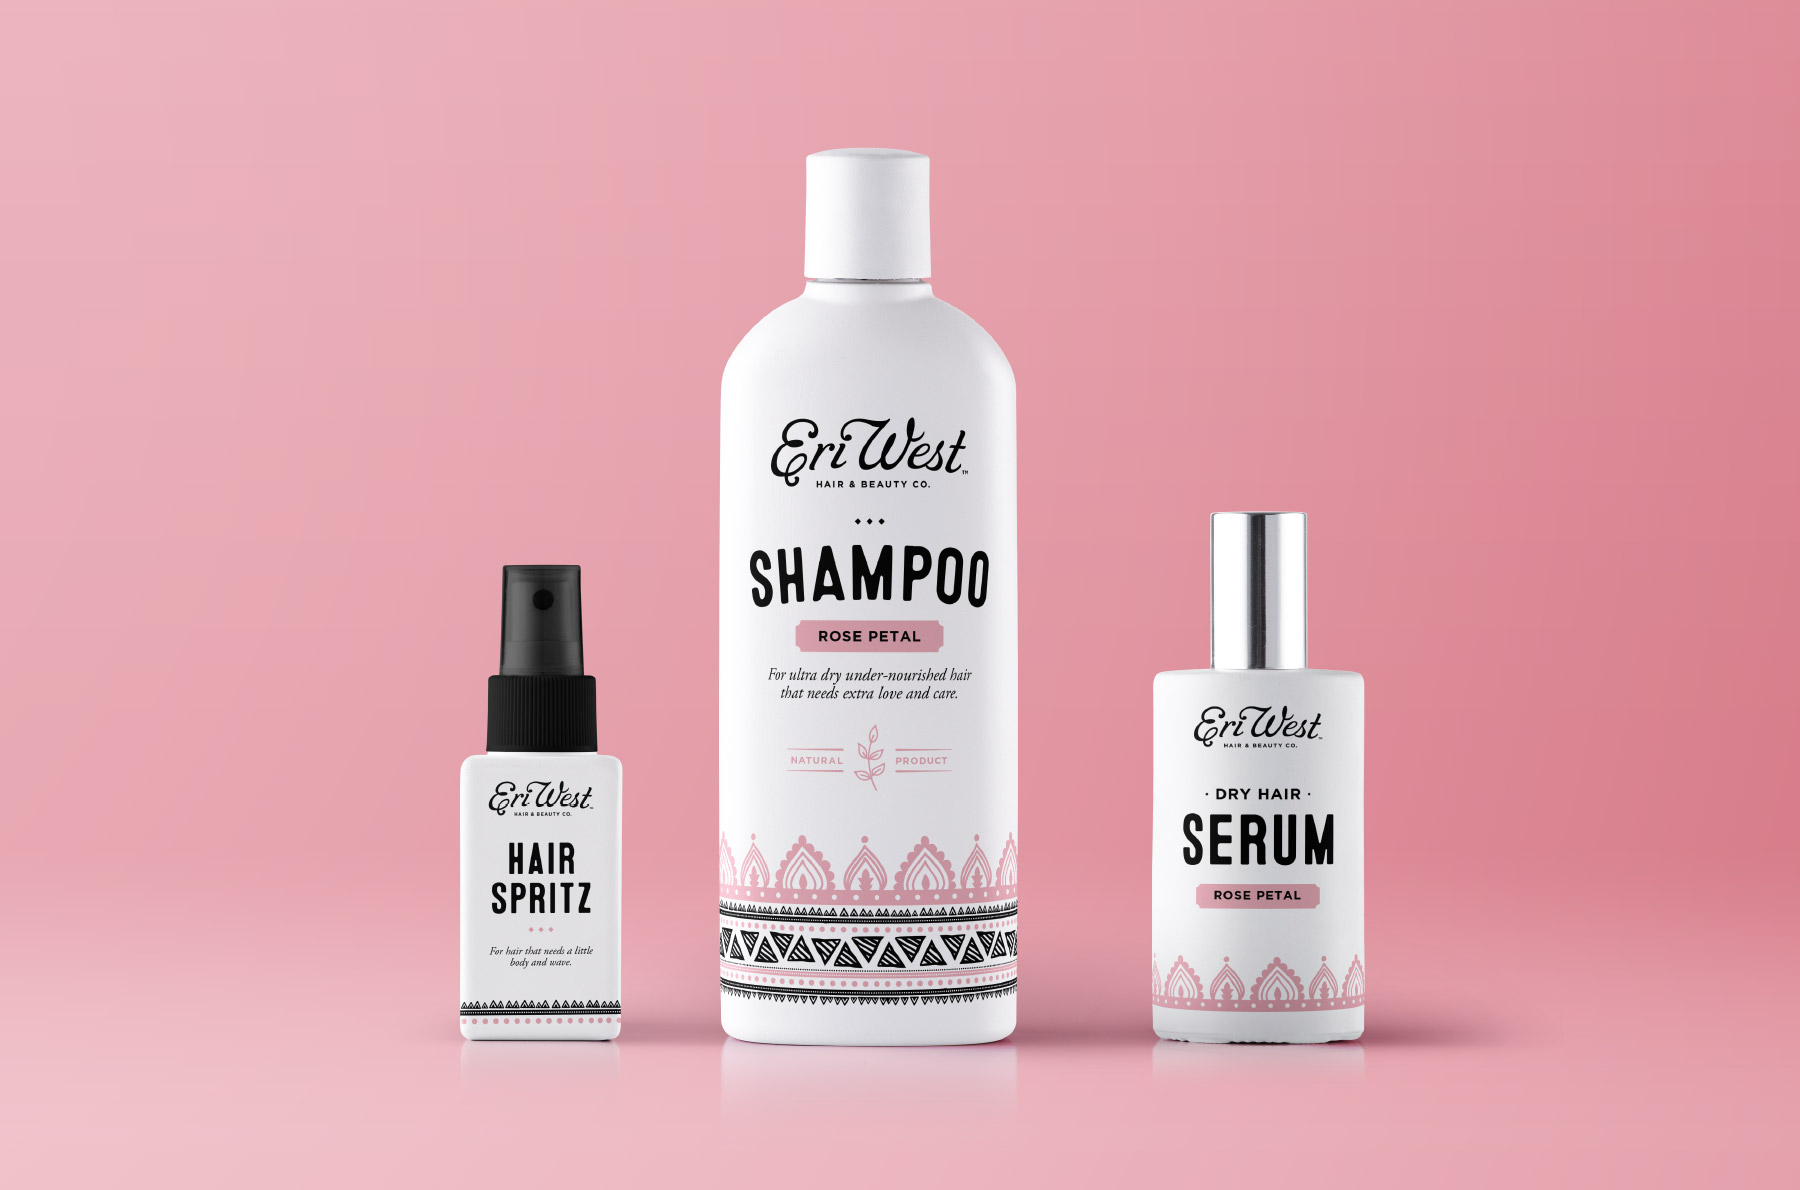 Hair care product packaging with bohemian design